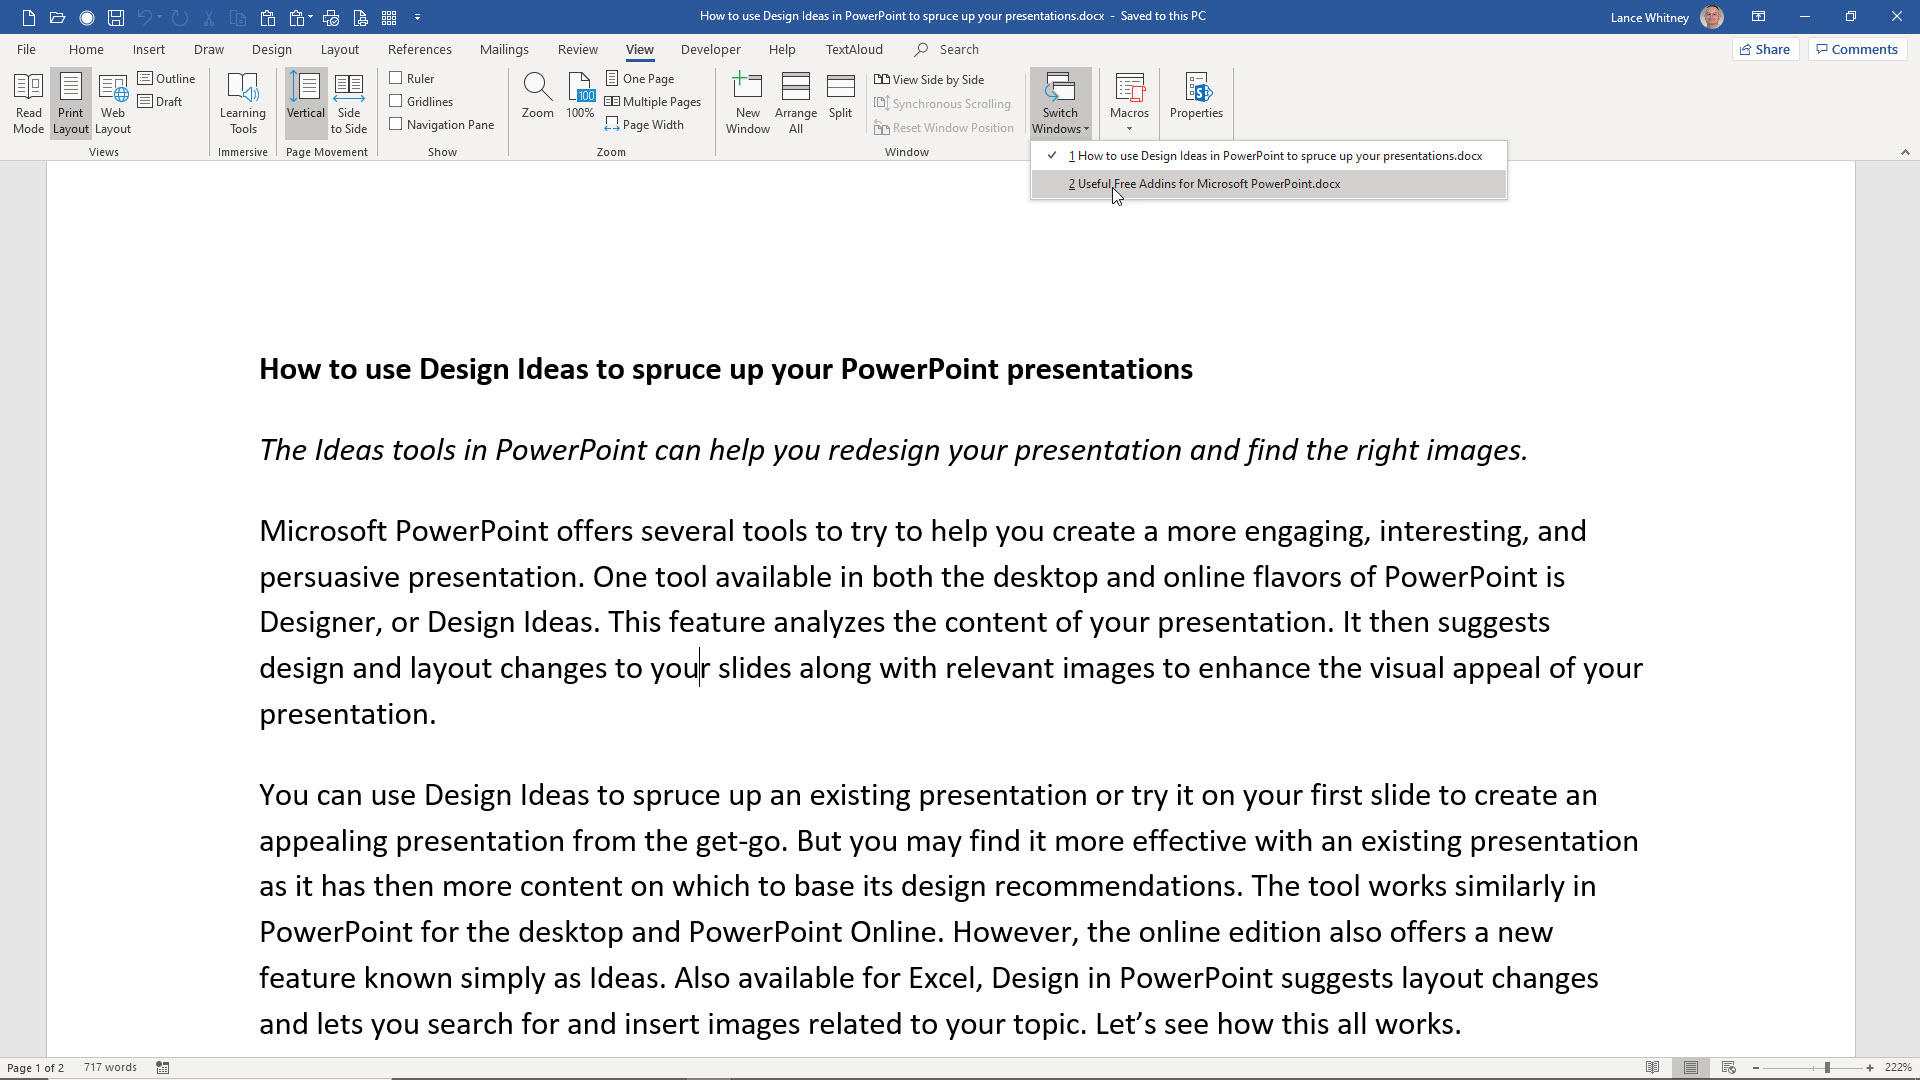 How to work with multiple documents in Microsoft Word - TechRepublic